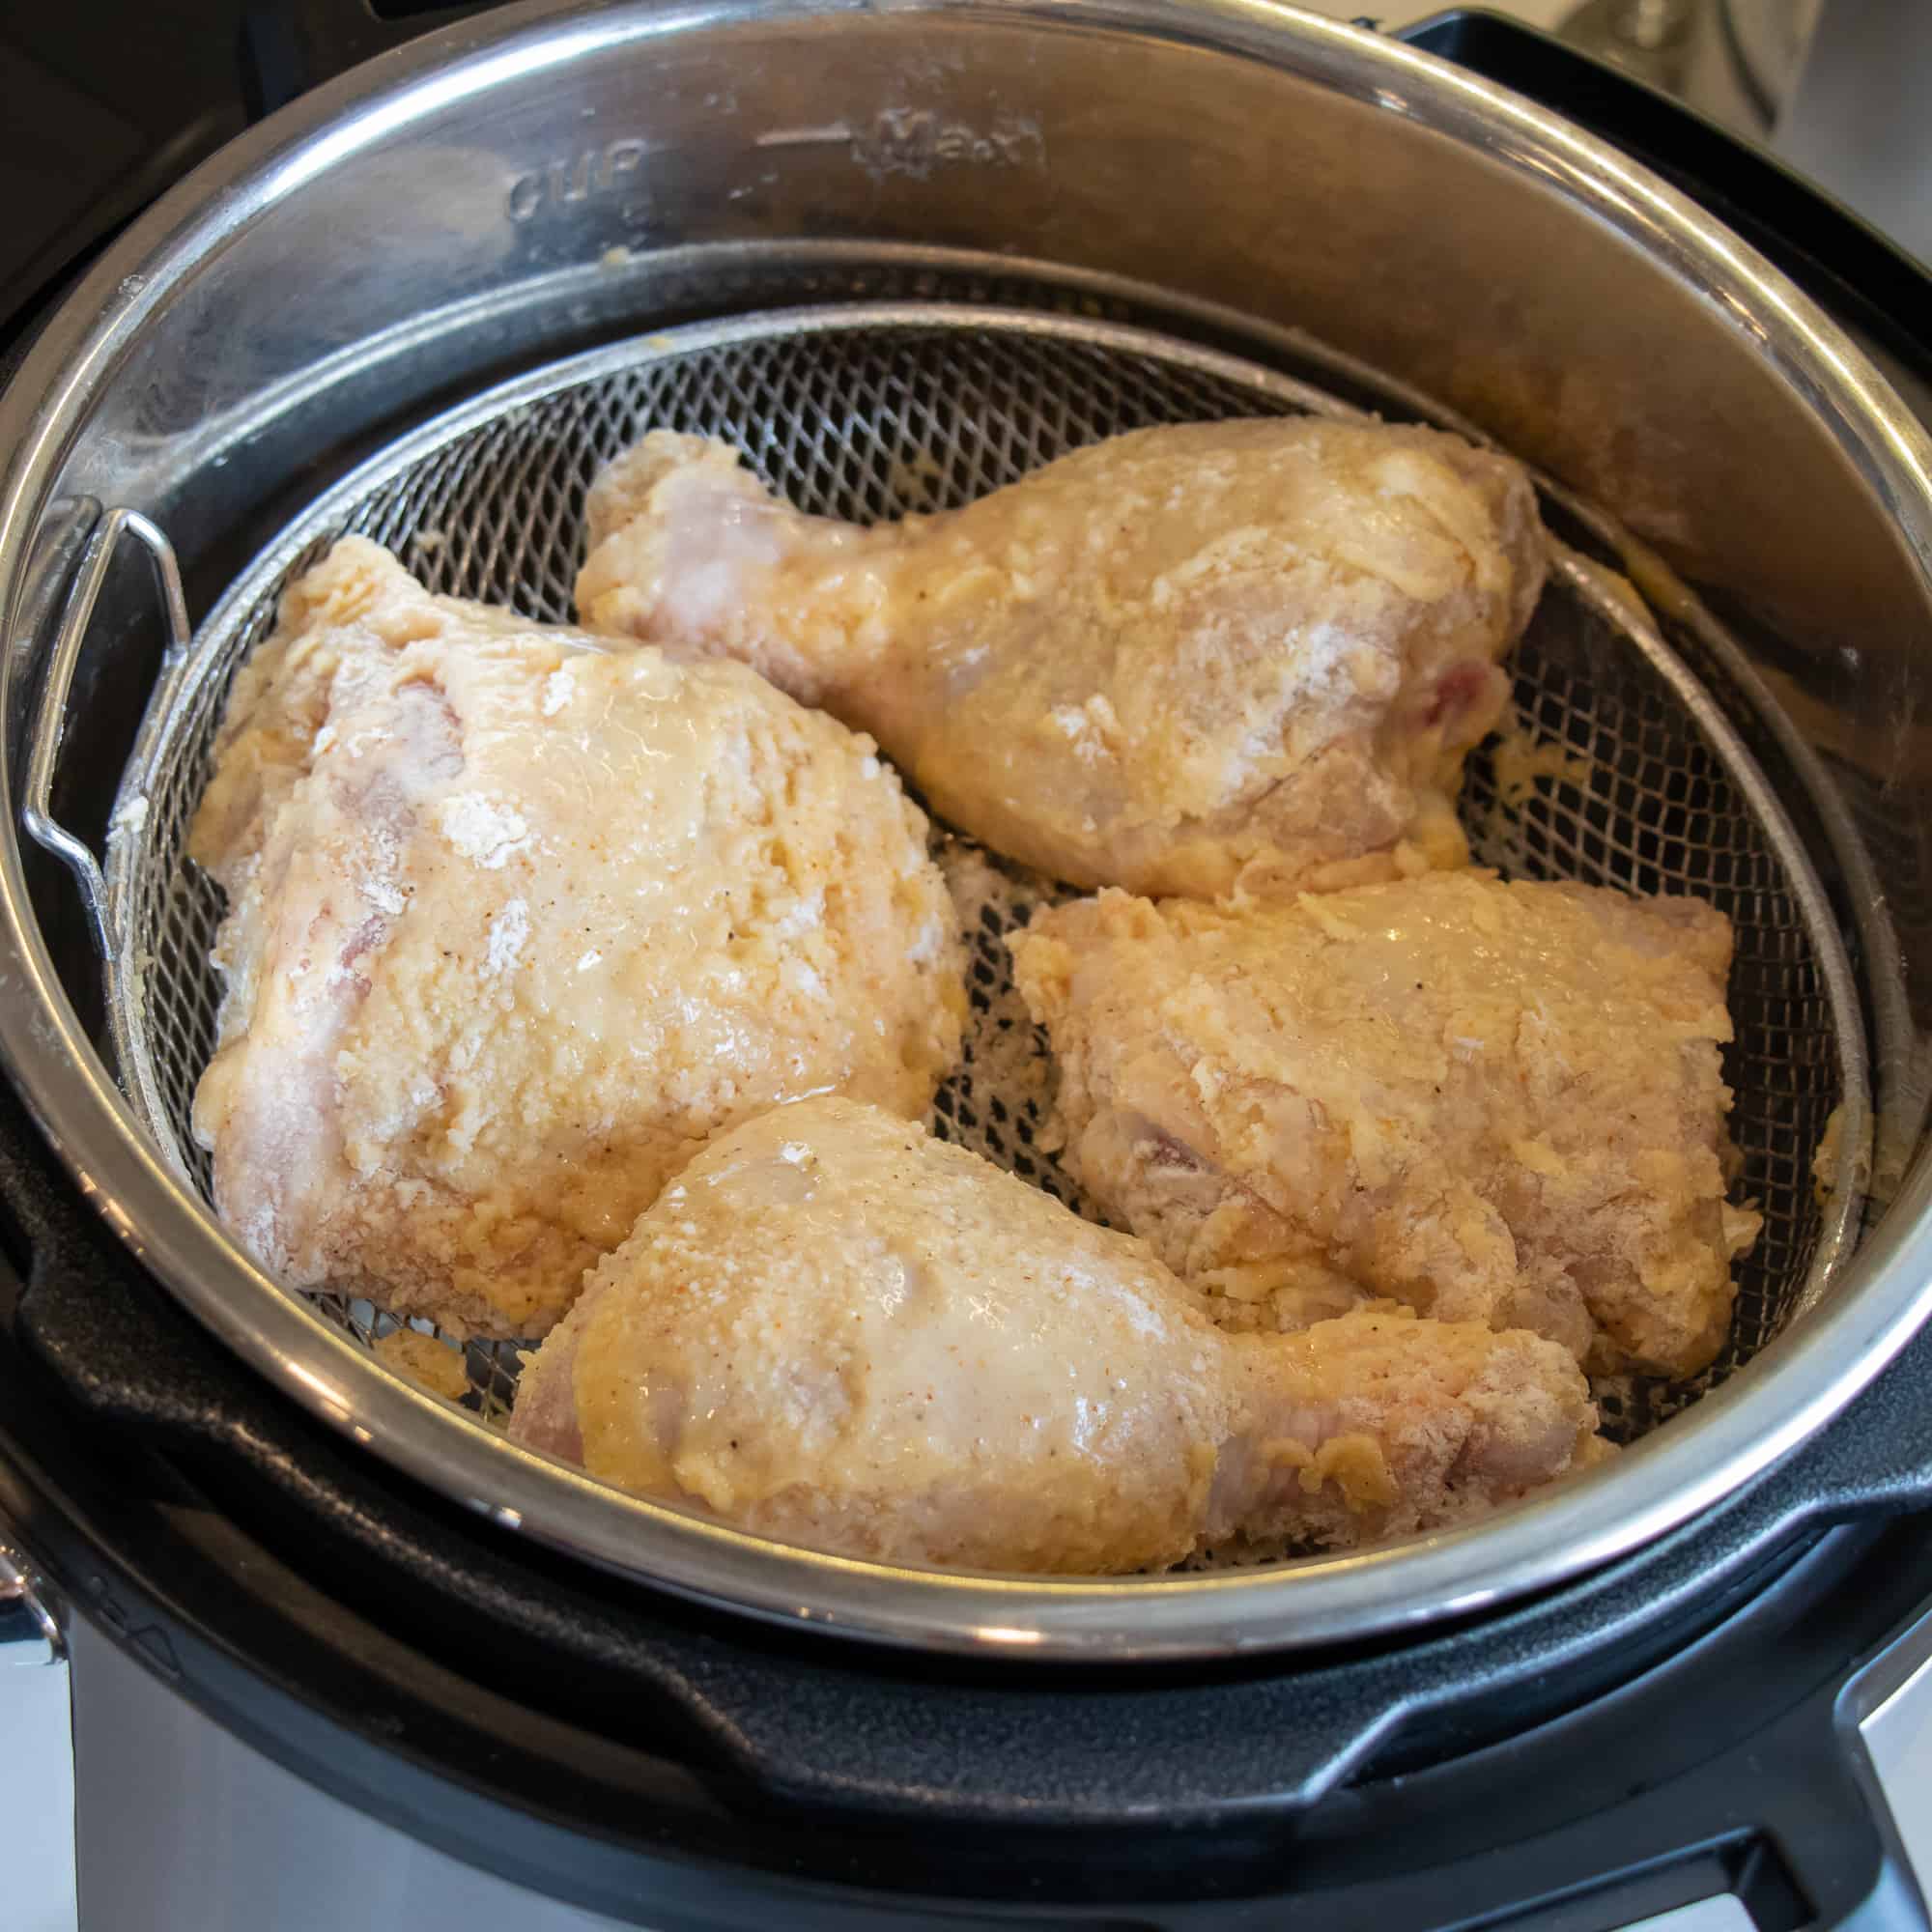 Place the chicken in the air fryer